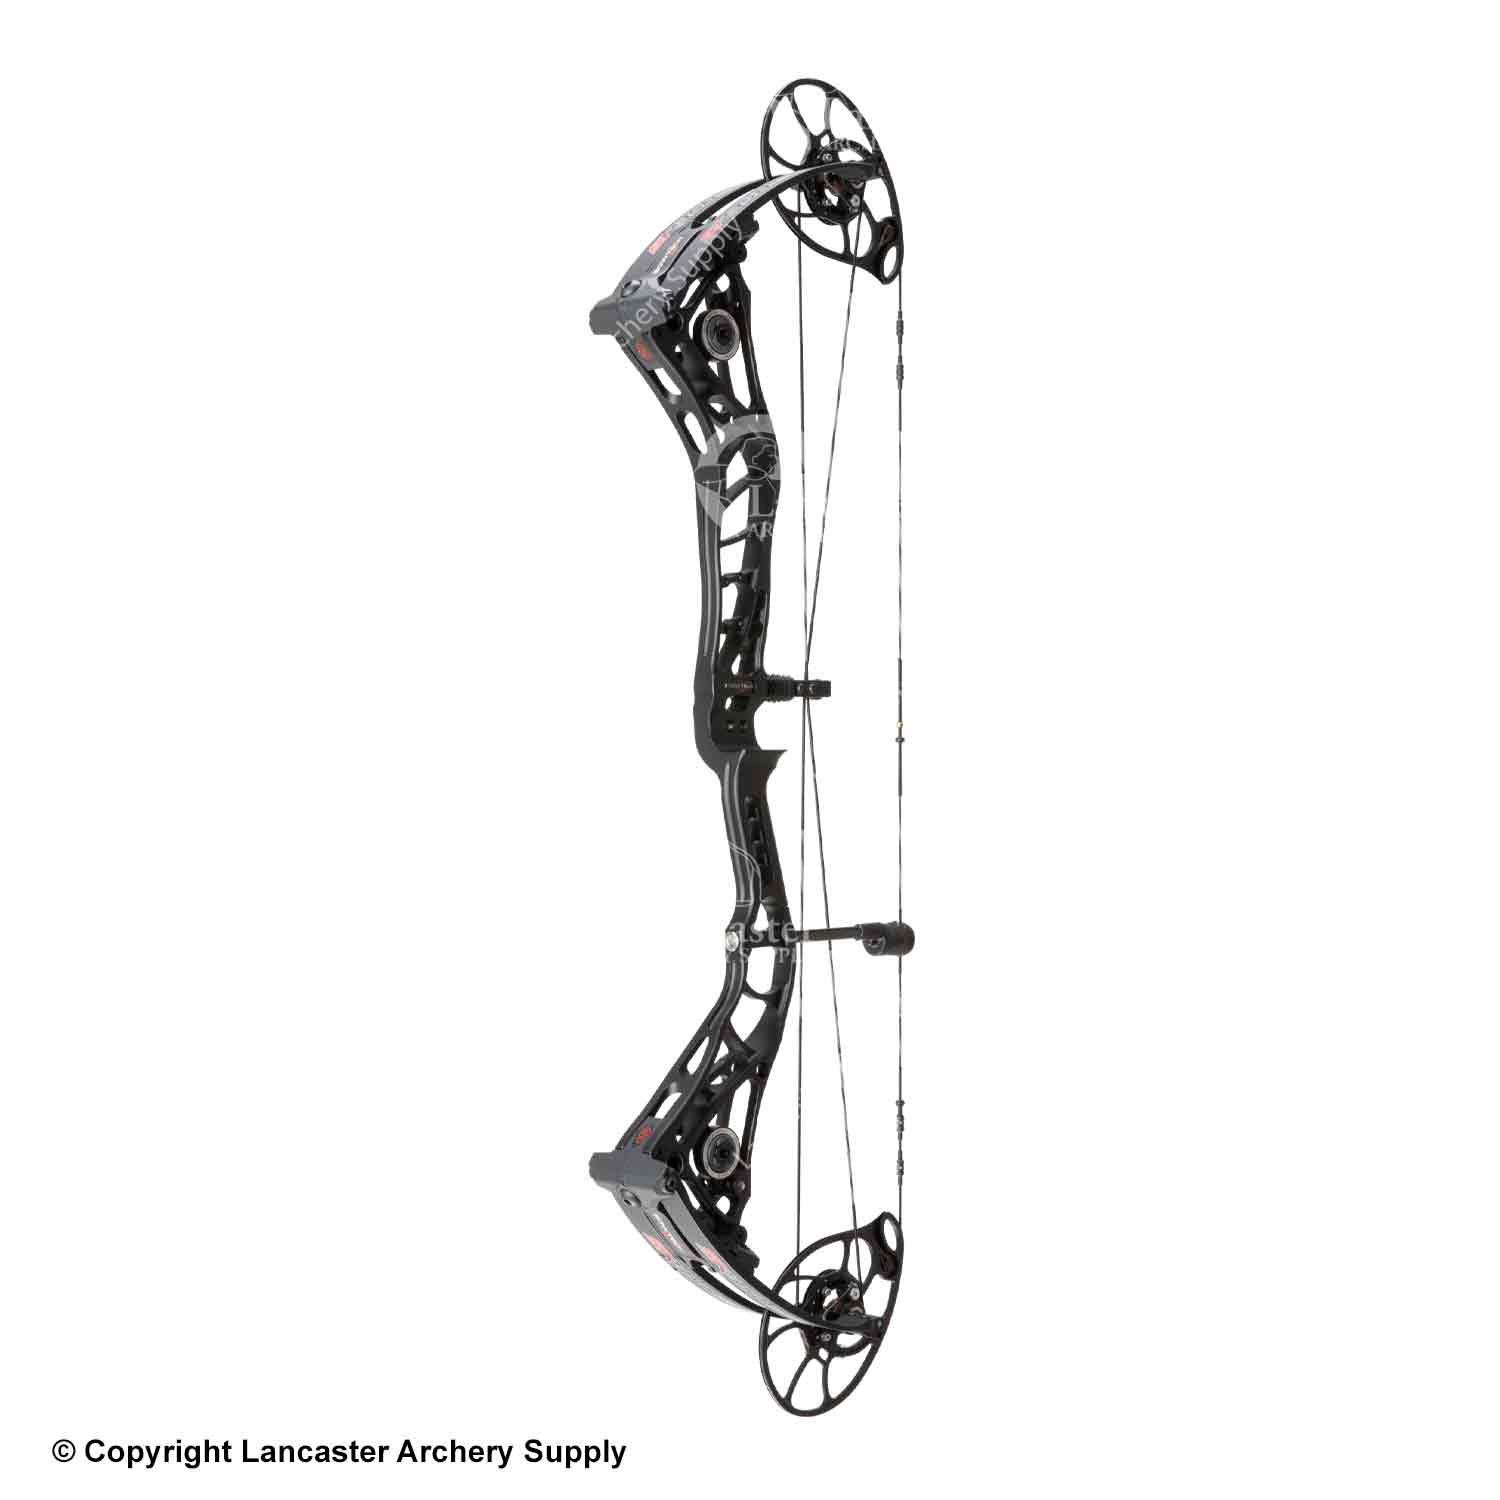 Bowtech SR350 Compound Hunting Bow